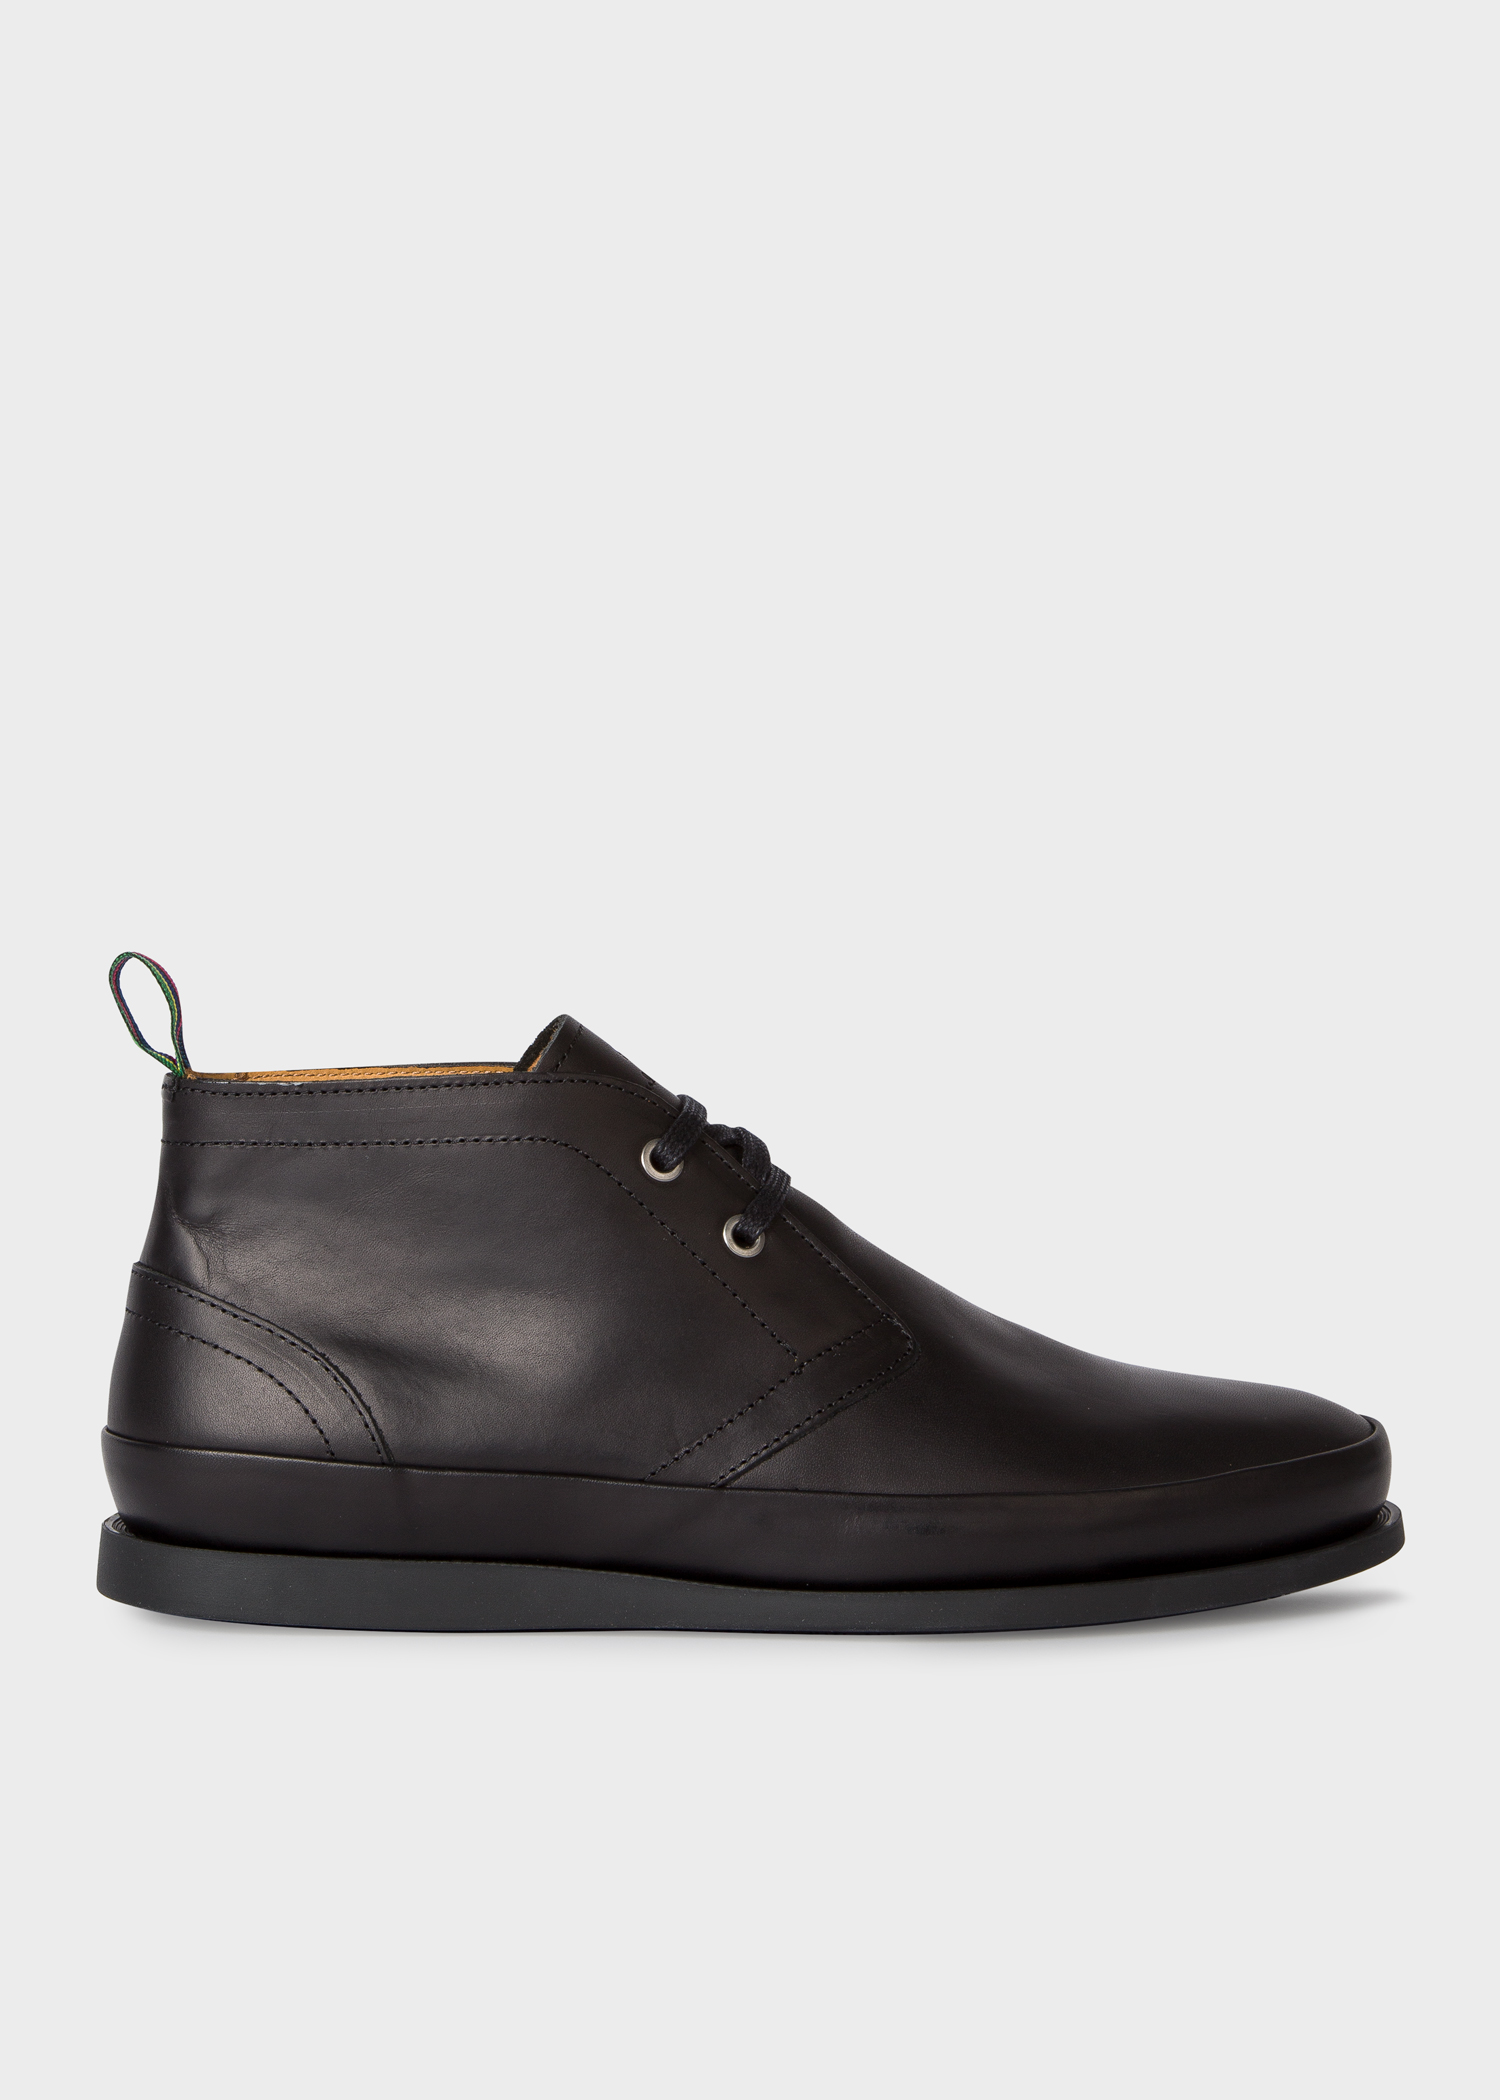 Men's Black Leather 'Cleon' Boots by Paul Smith